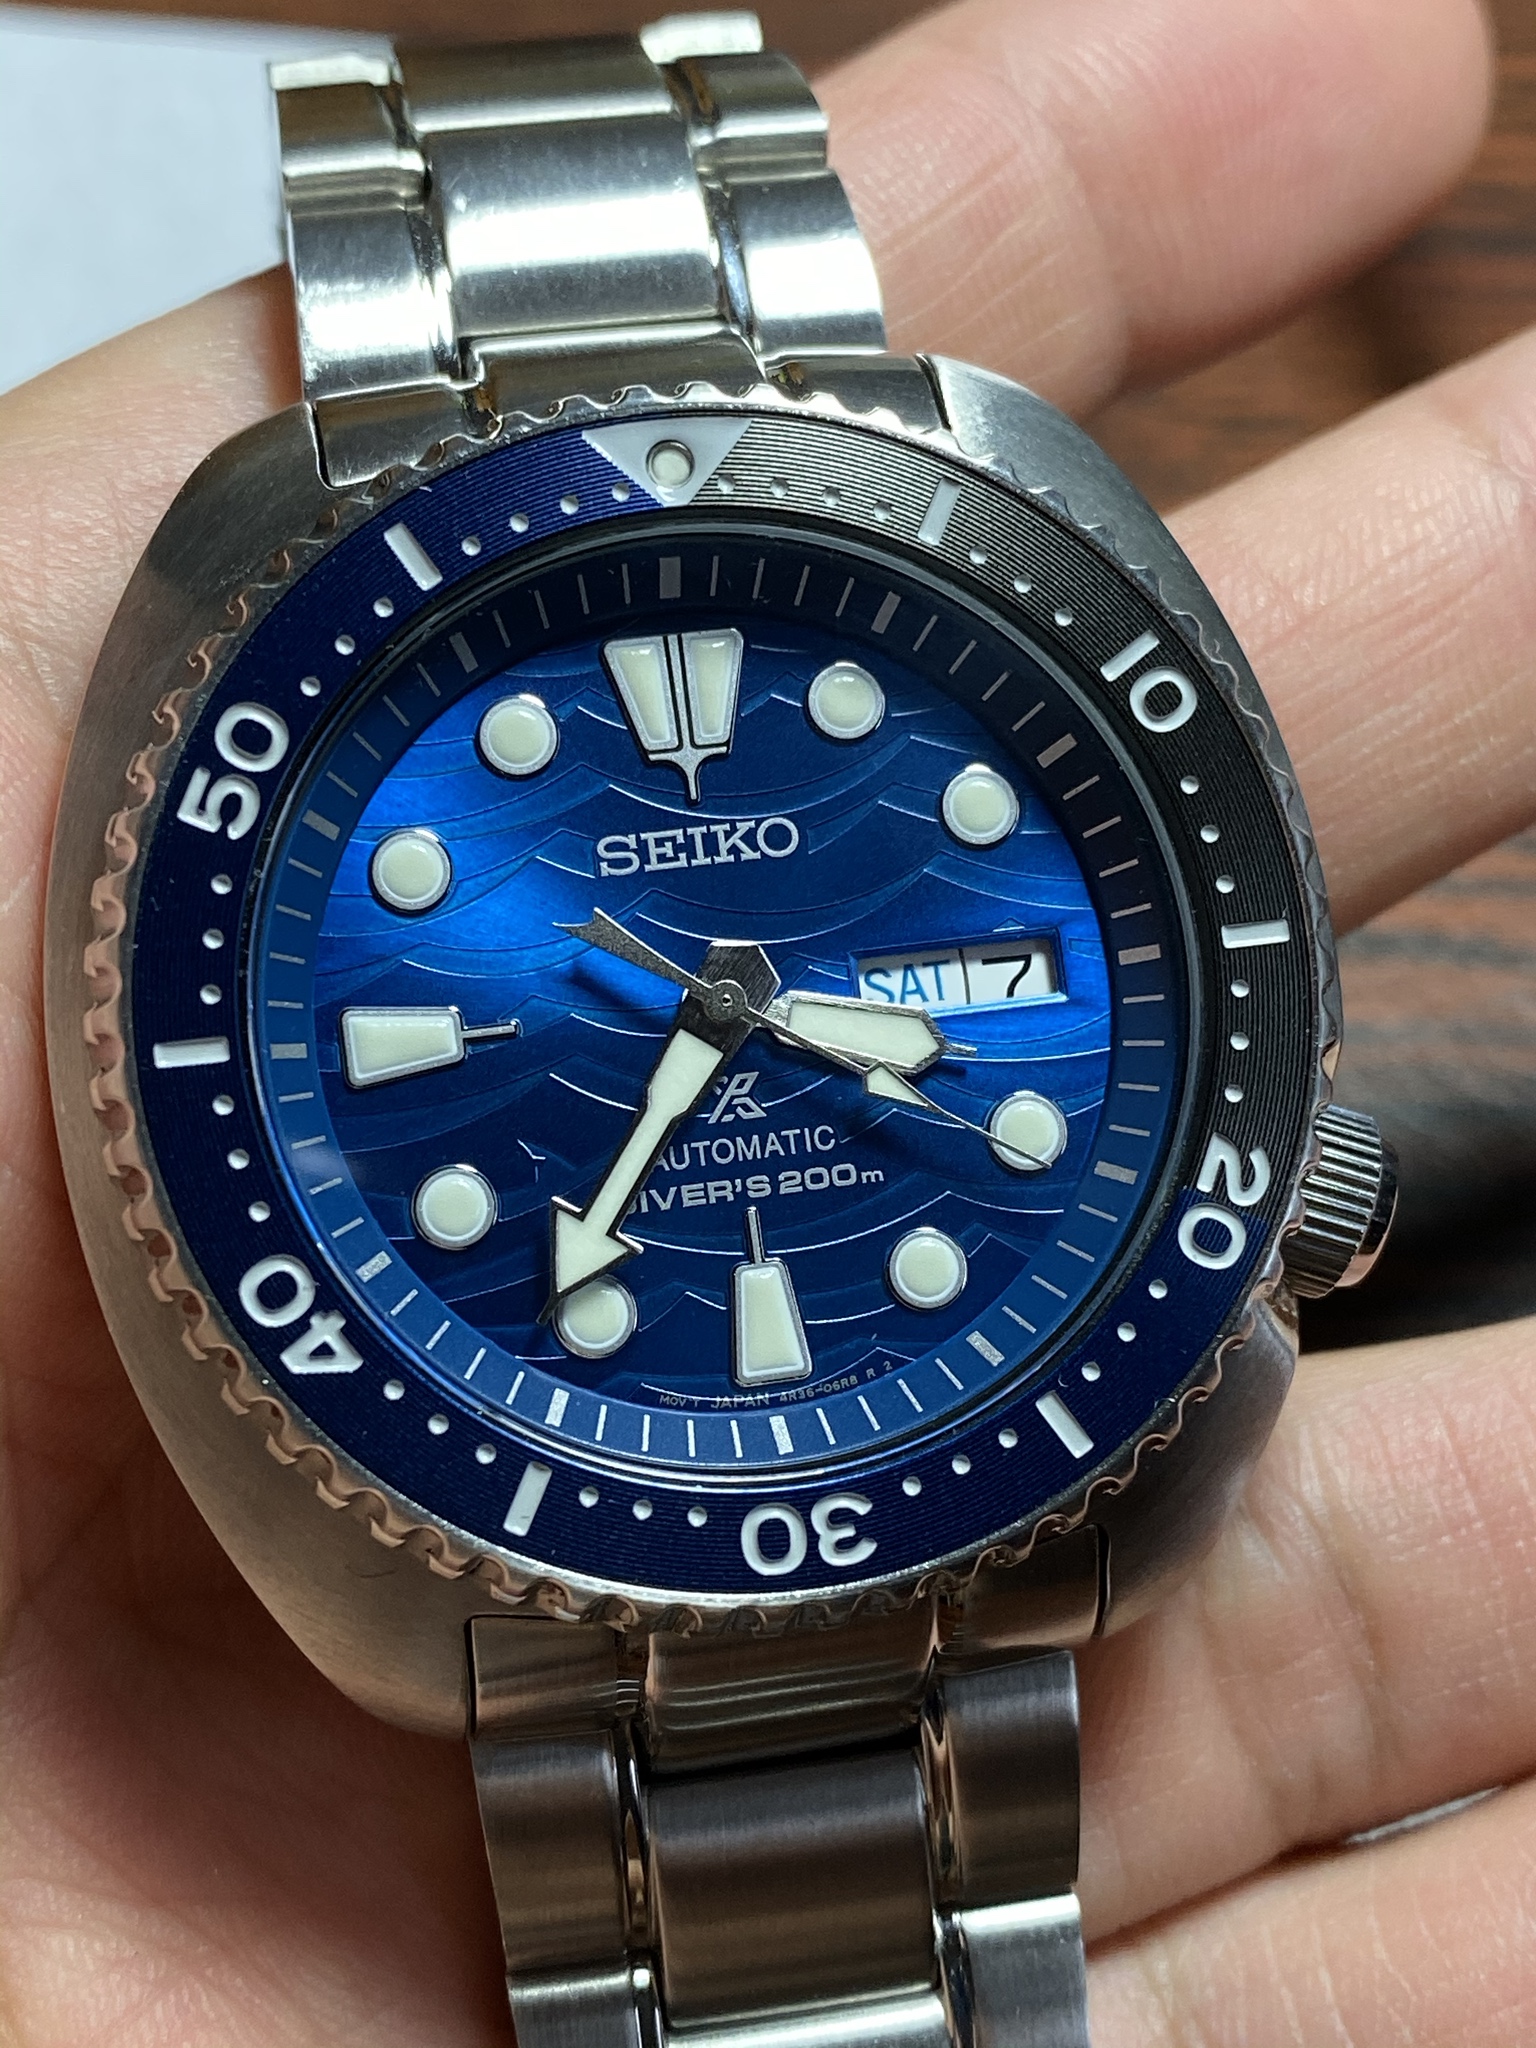 WTS] Seiko Turtle Save the Ocean "Great White Shark" [B] WatchCharts